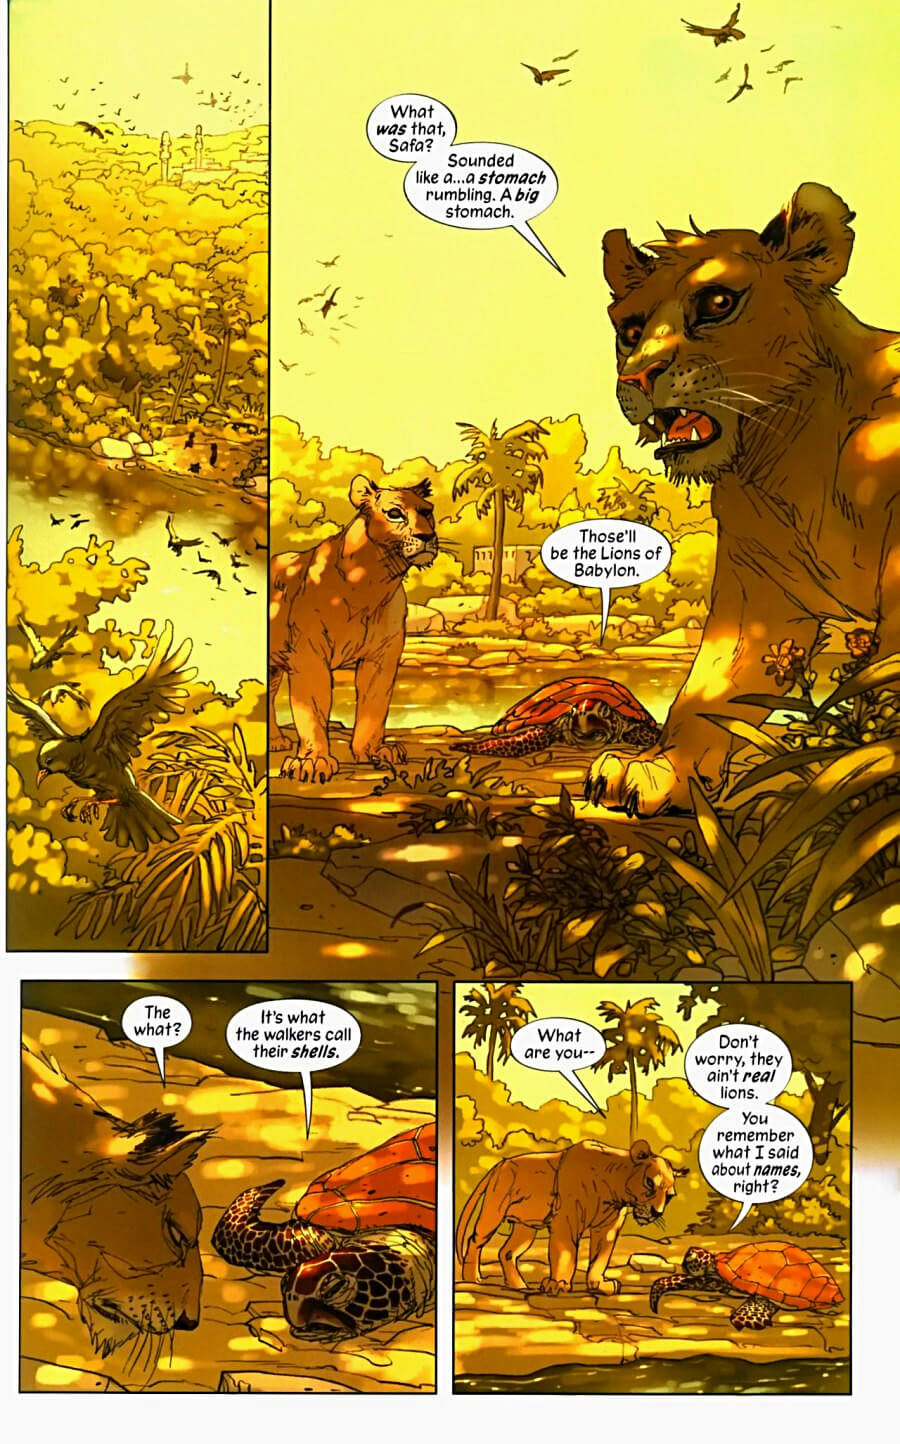 page 53 of pride of baghdad graphic novel